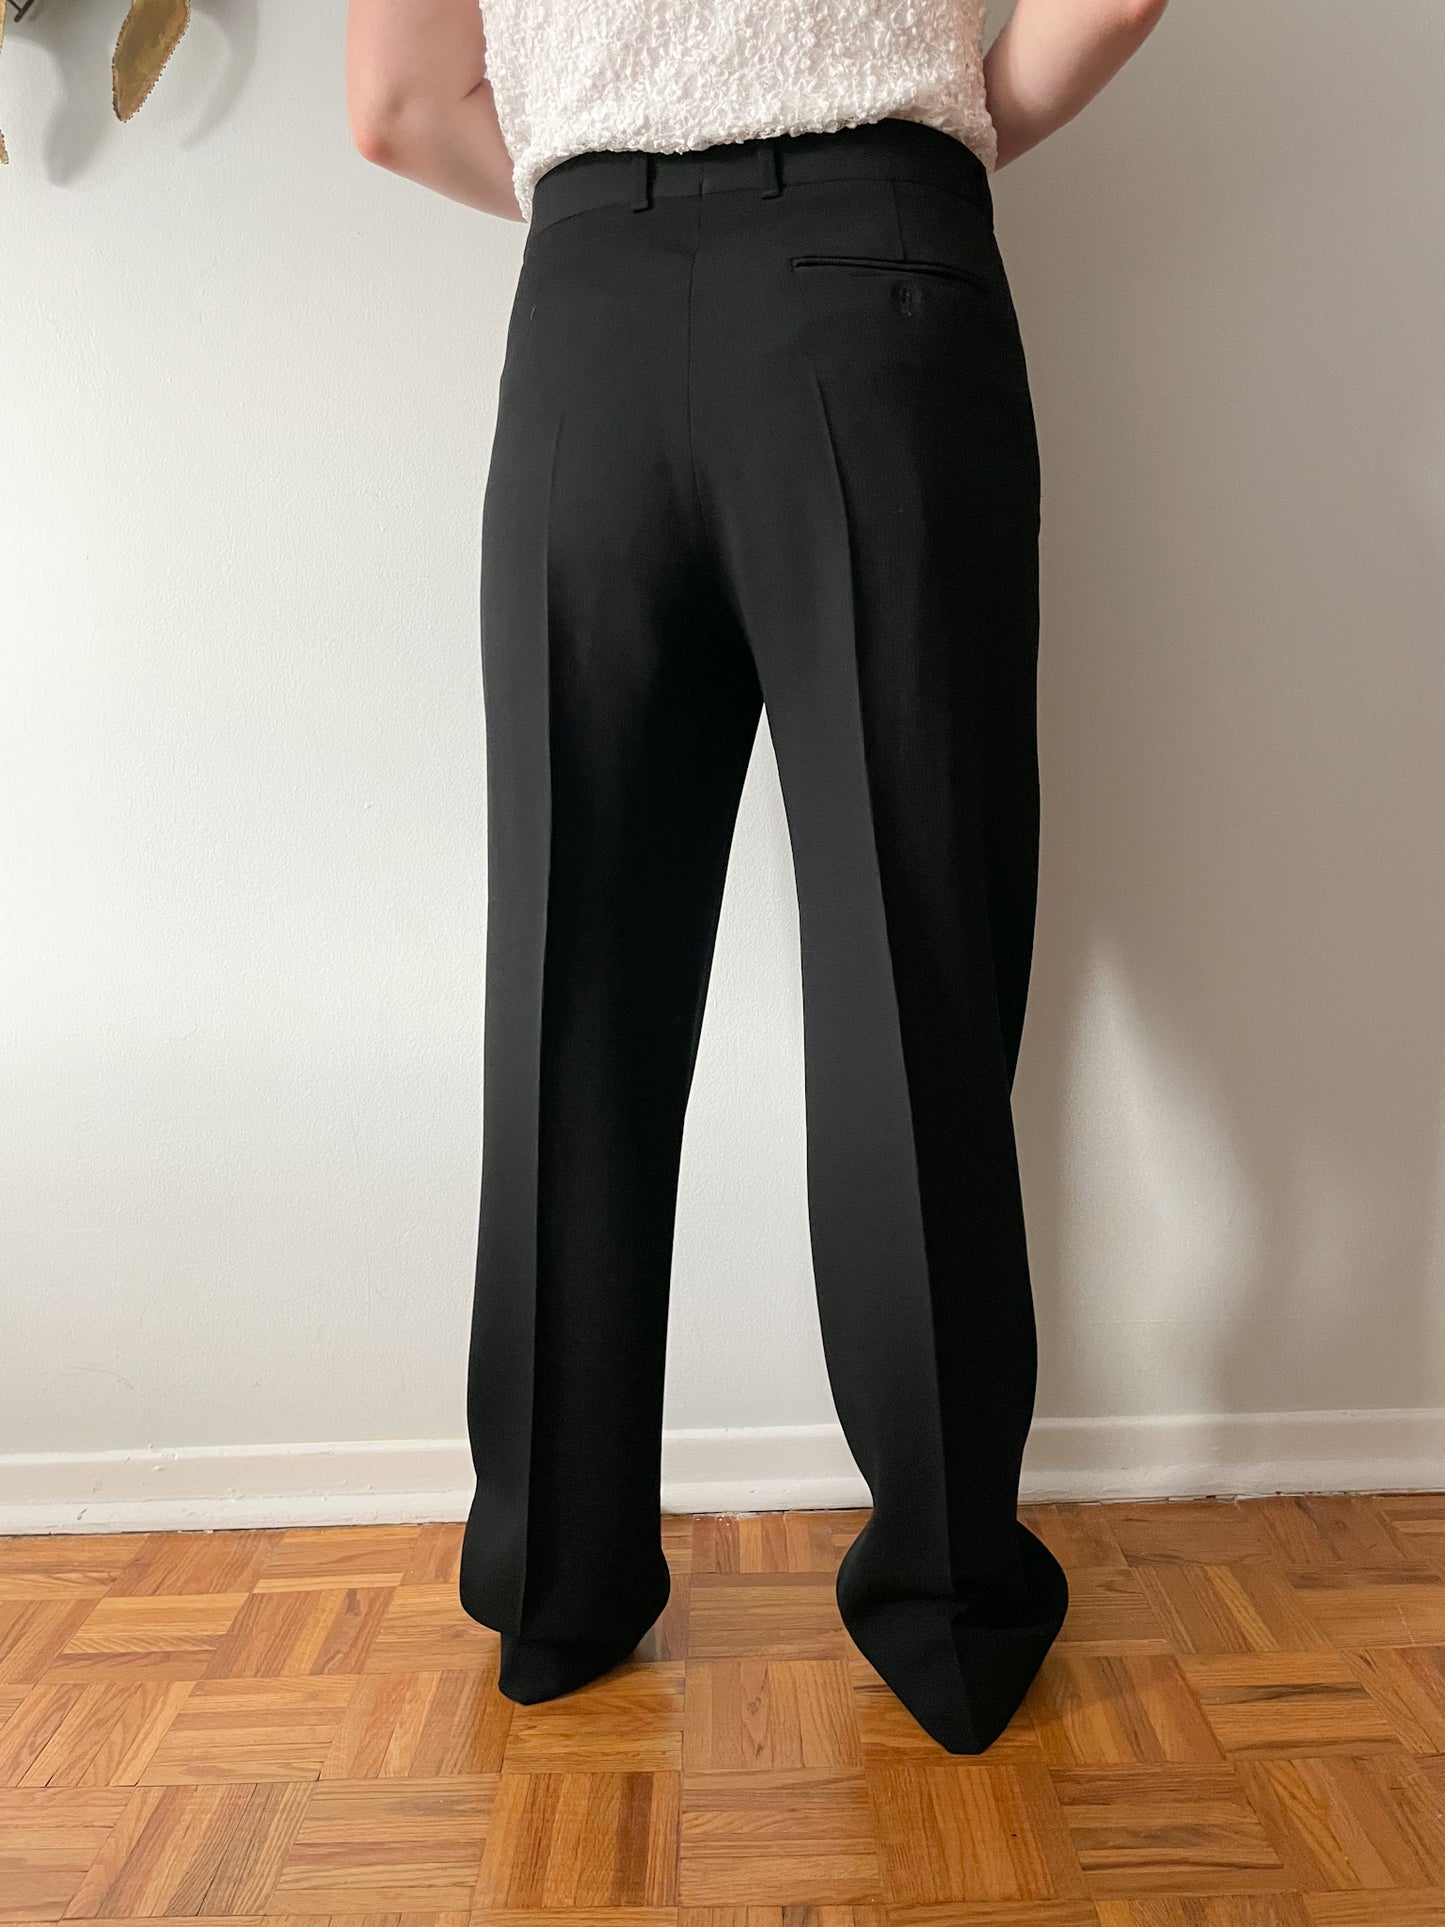 Caramelo Black High Rise Pleated Trouser Pants - XL